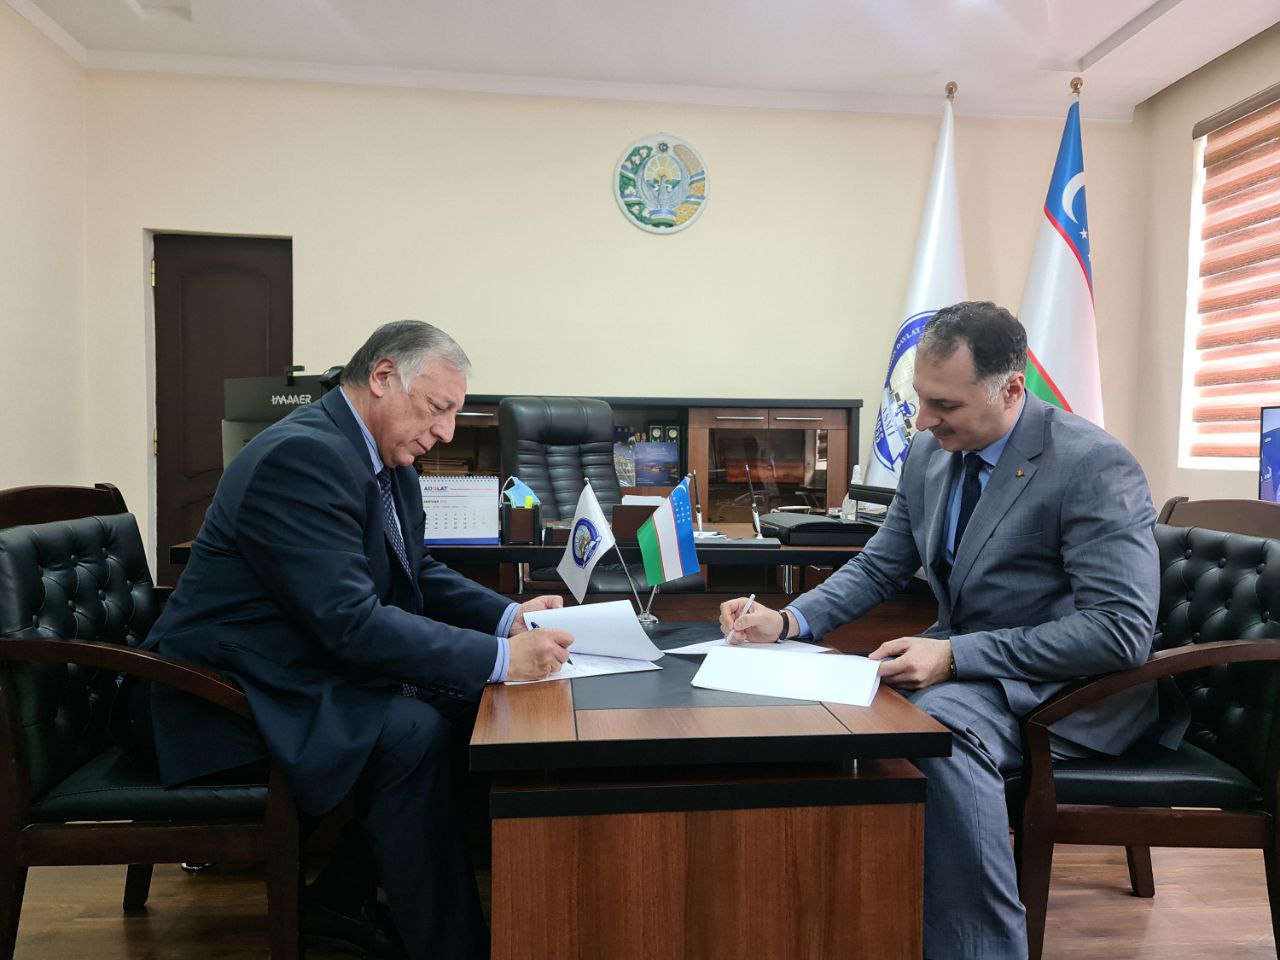 THE RECTOR OF THE INSTITUTE SIGNS A MEMORANDUM OF COOPERATION WITH A FOREIGN EXPERT